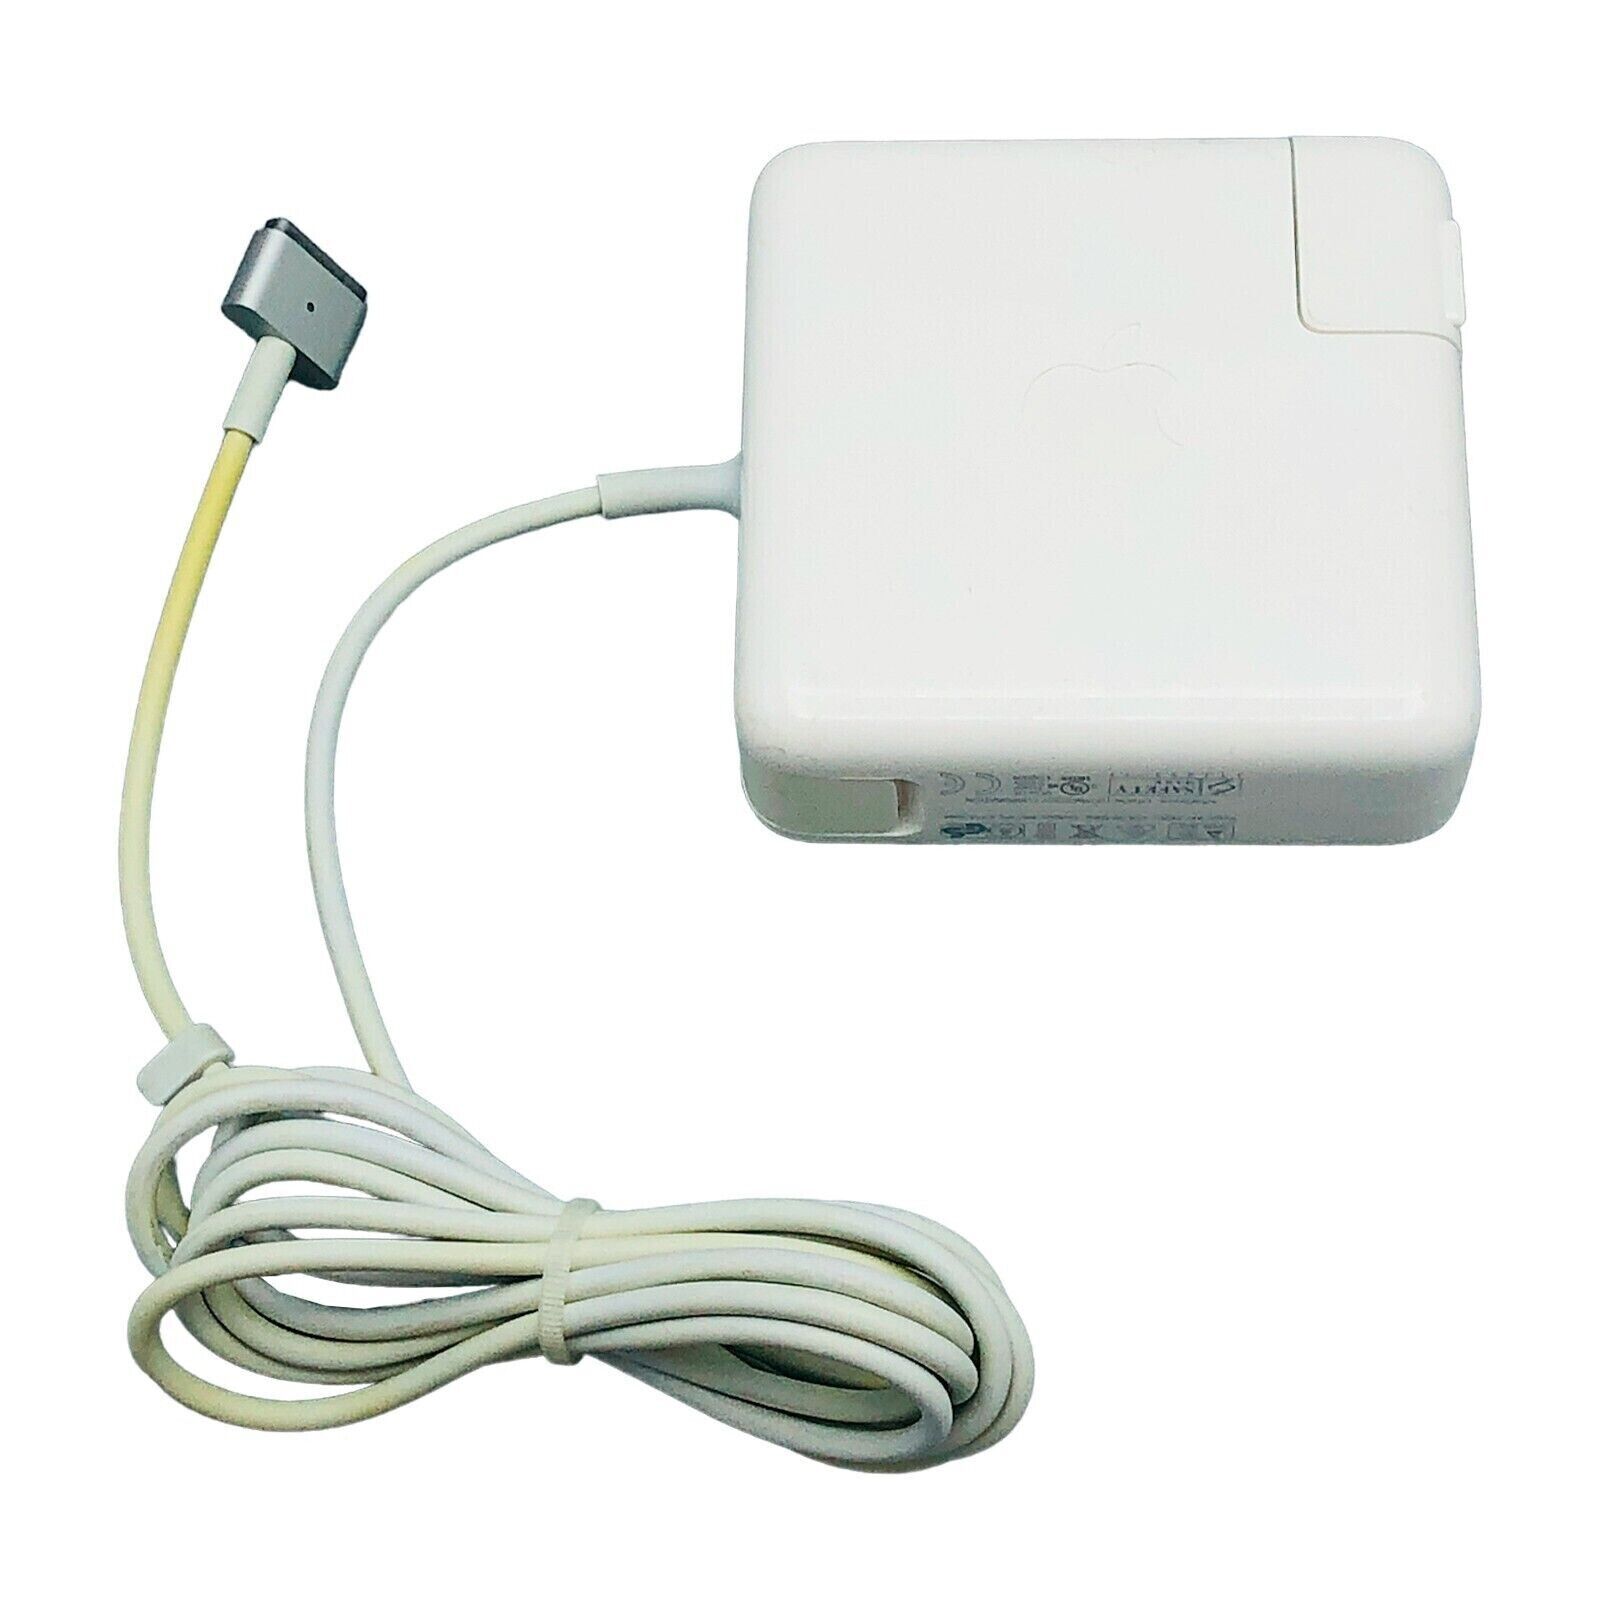 Original APPLE MacBook Air Magsafe 2 45W Power Adapter Charger A1436 MD592LL/A